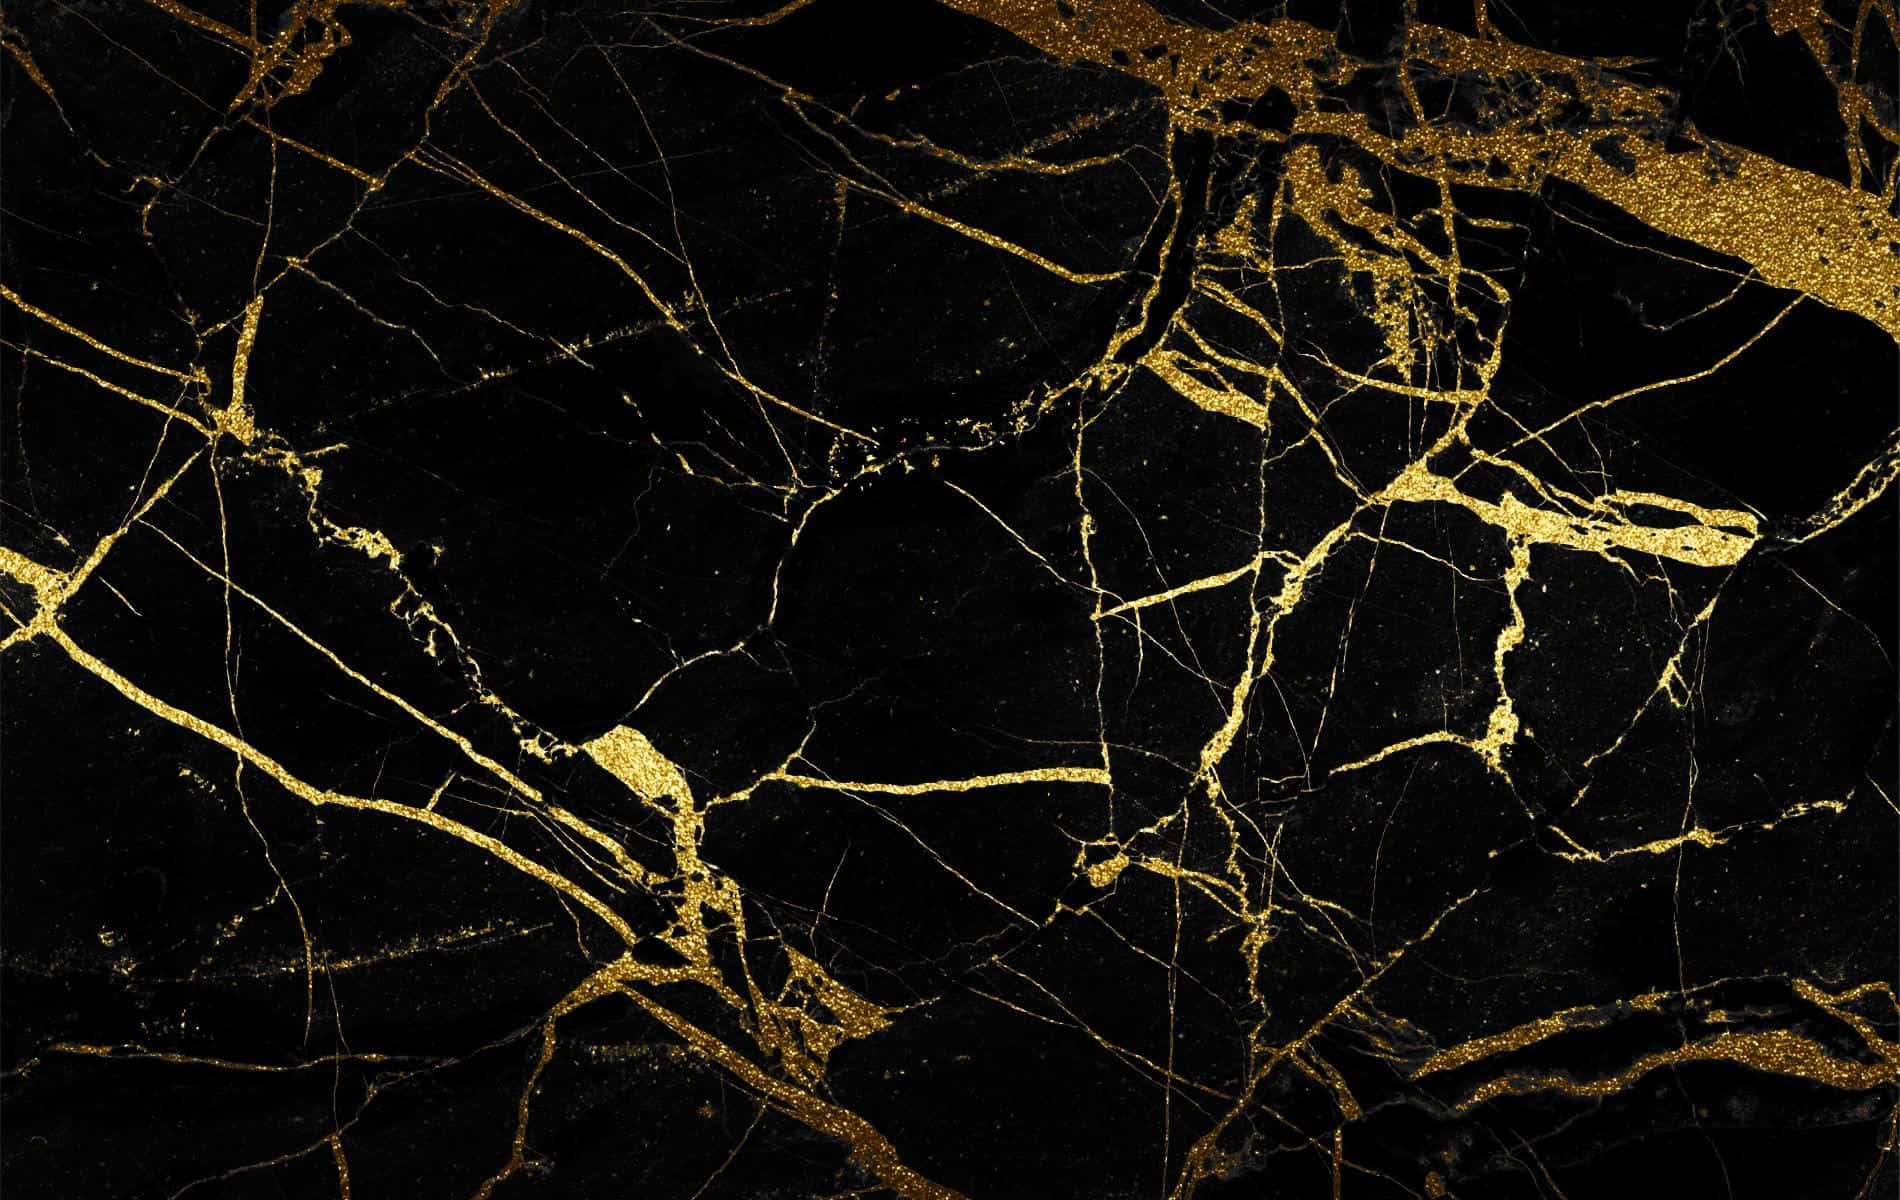 Shine in Black and Gold with this Desktop Wallpaper